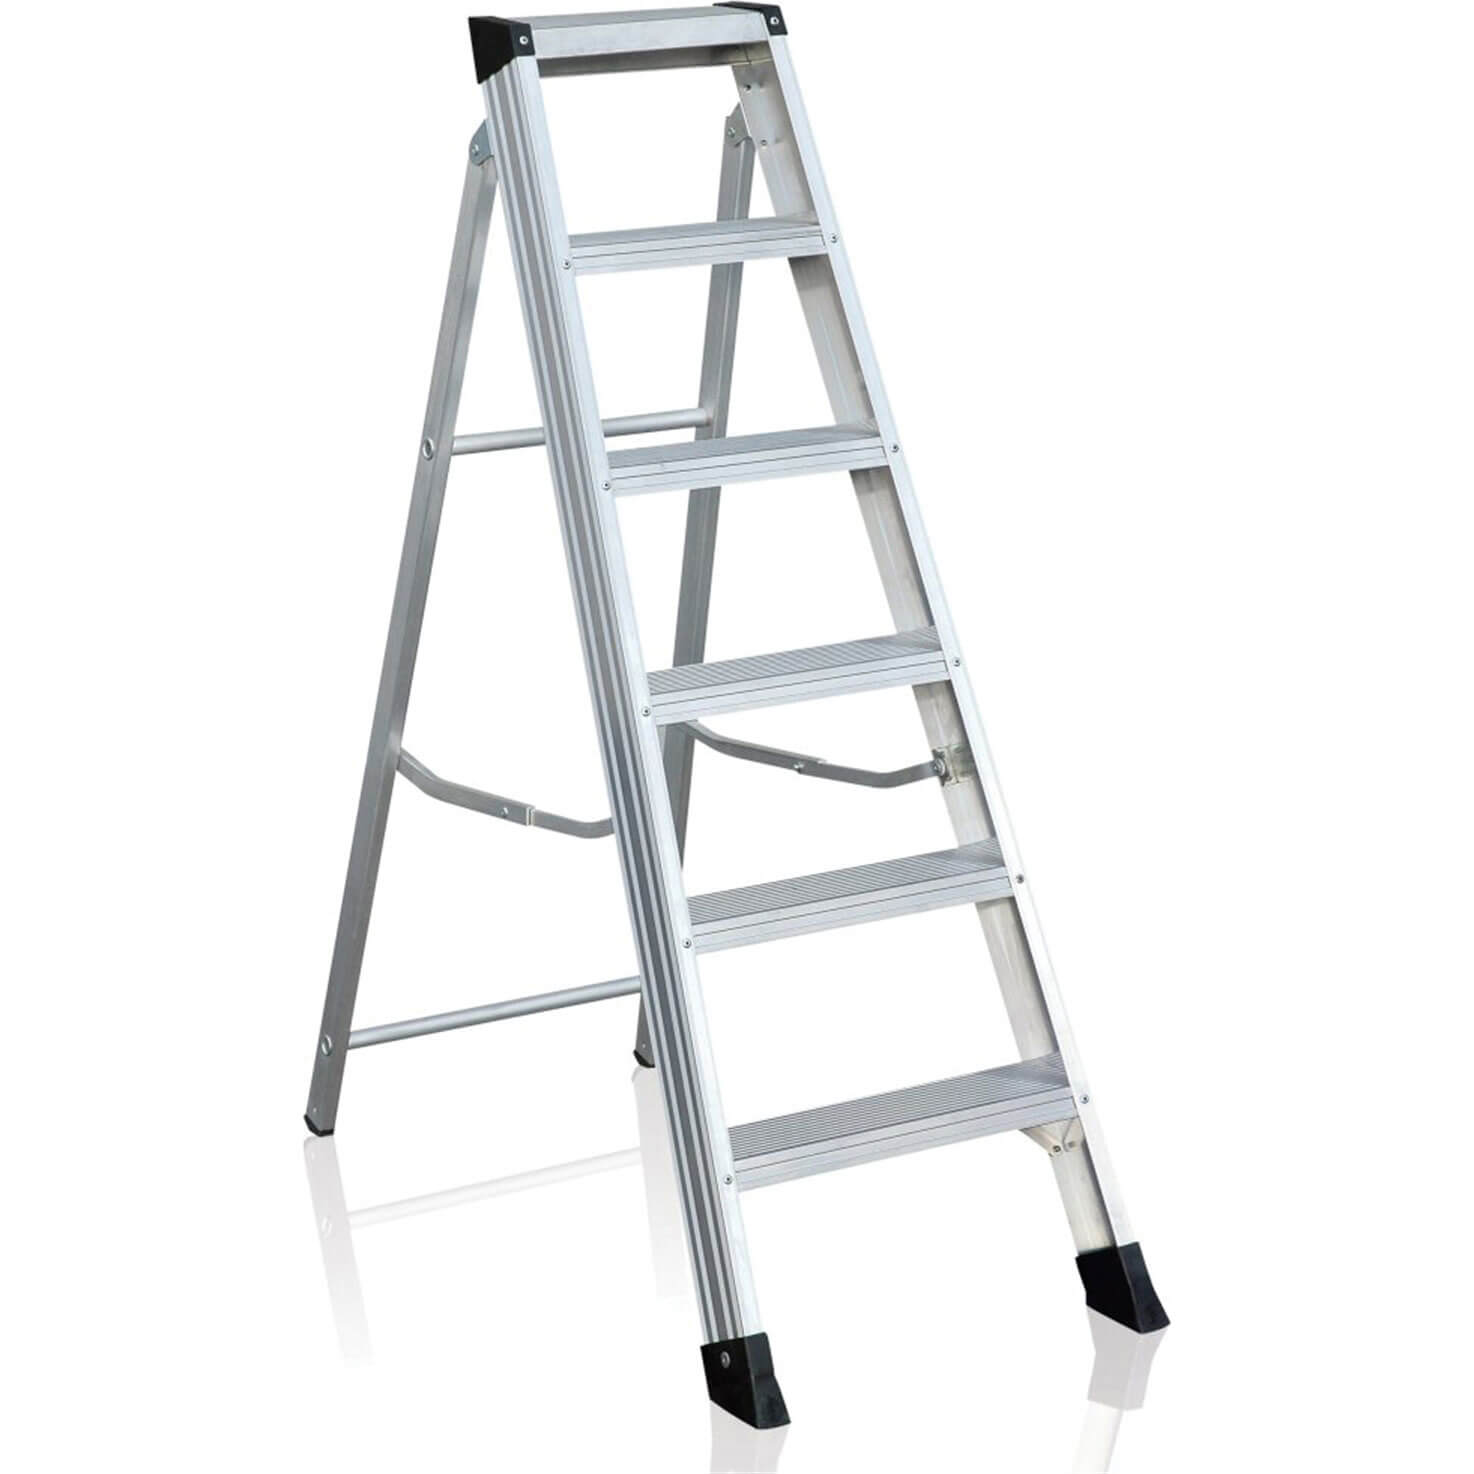 Image of Zarges Trade Swingback Step Ladder 5